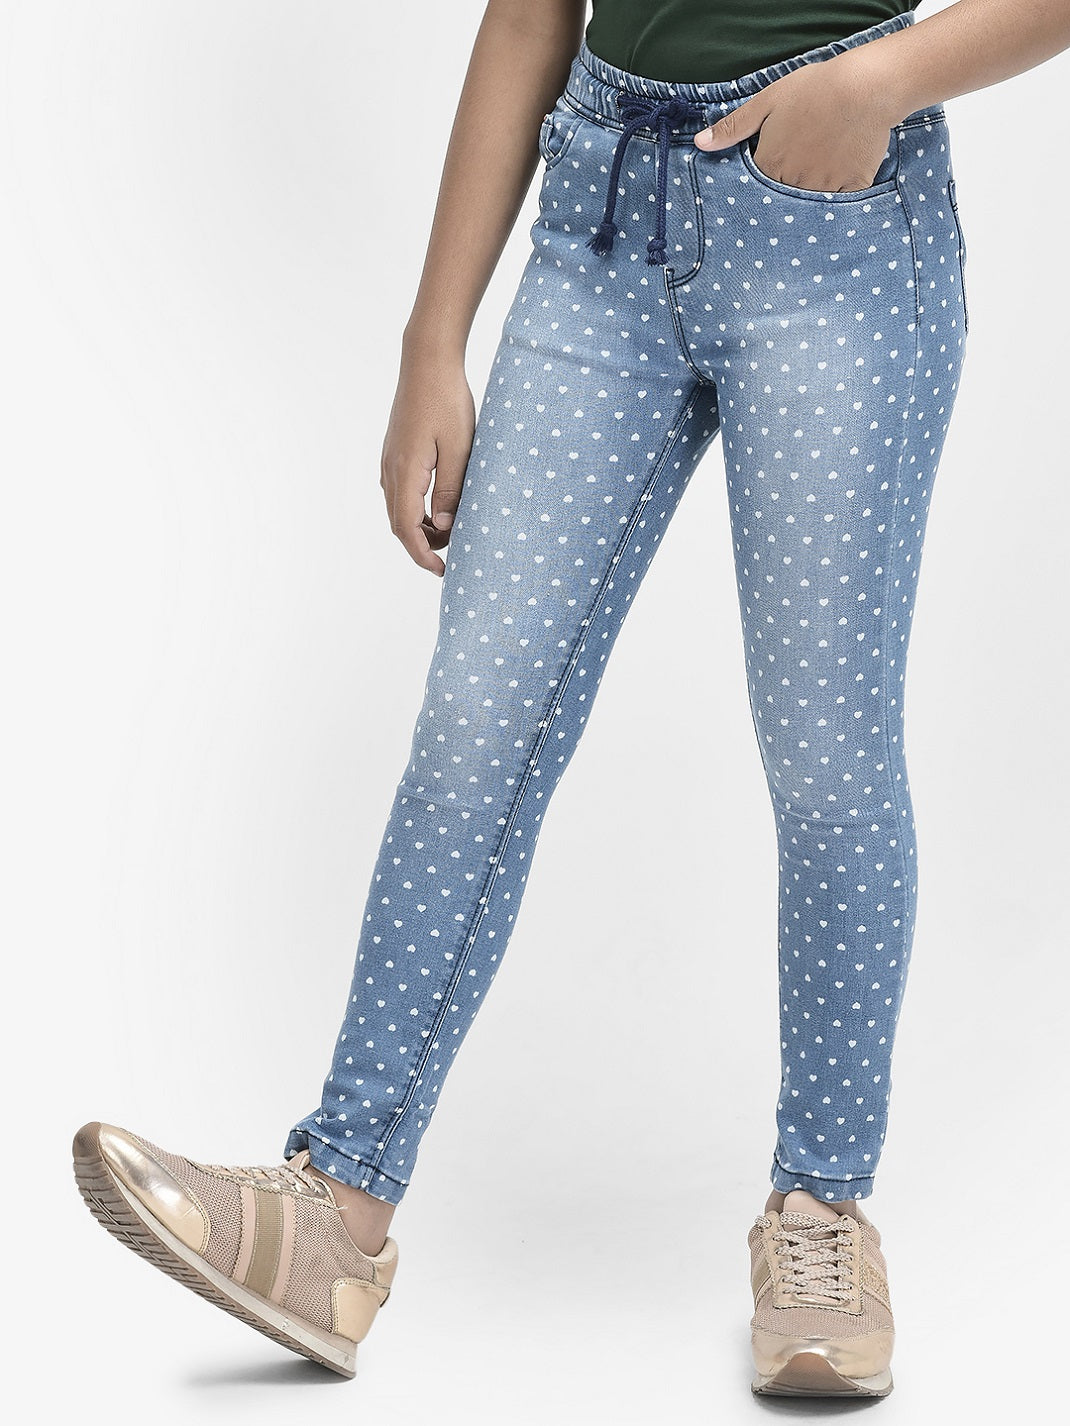  Blue Printed Heavy Faded Jeans